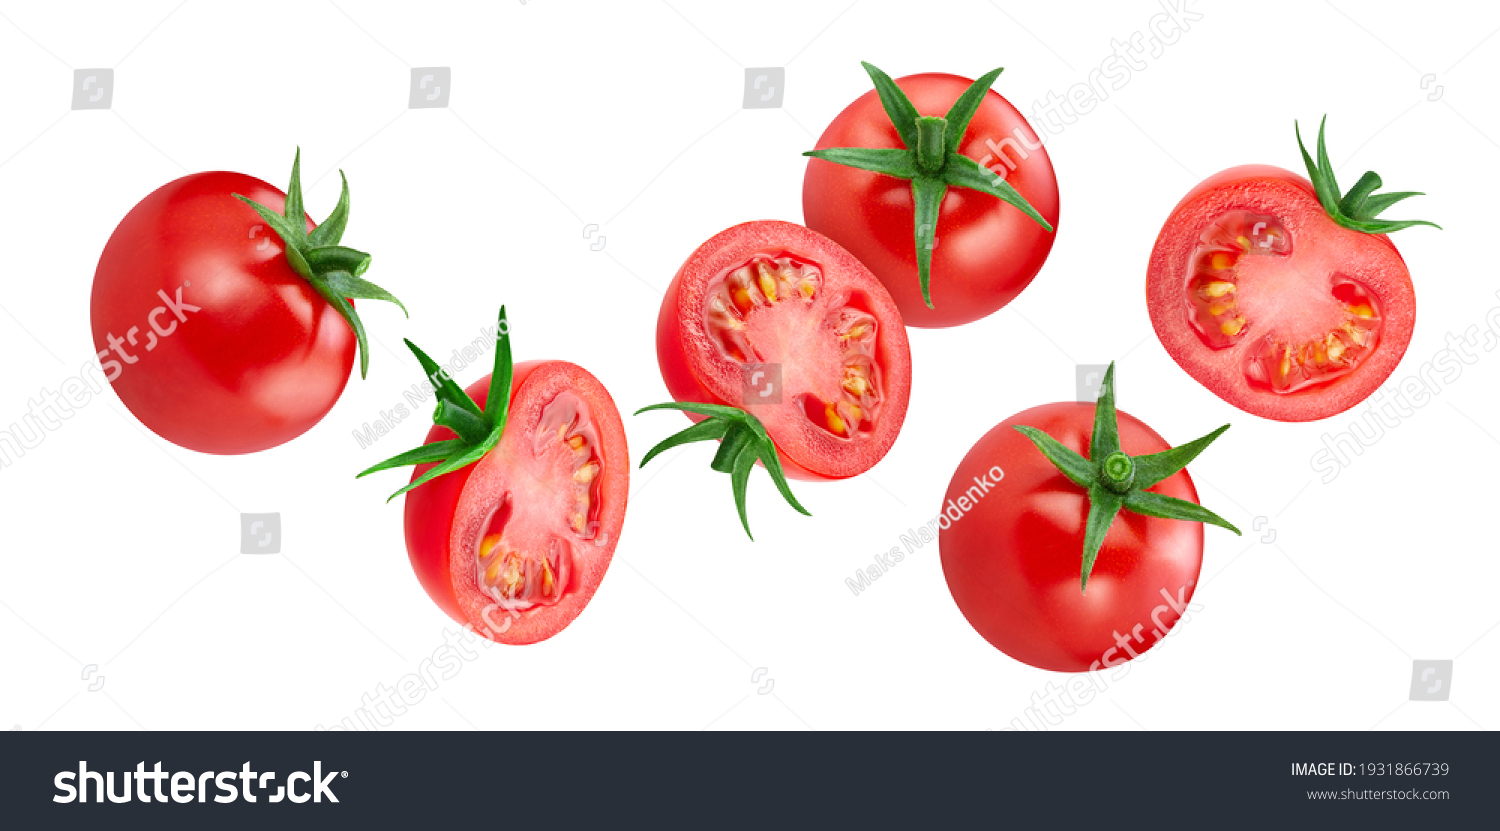 Red tomato half isolated on white background. Tomato slice clipping path. Tomato vegetable #1931866739